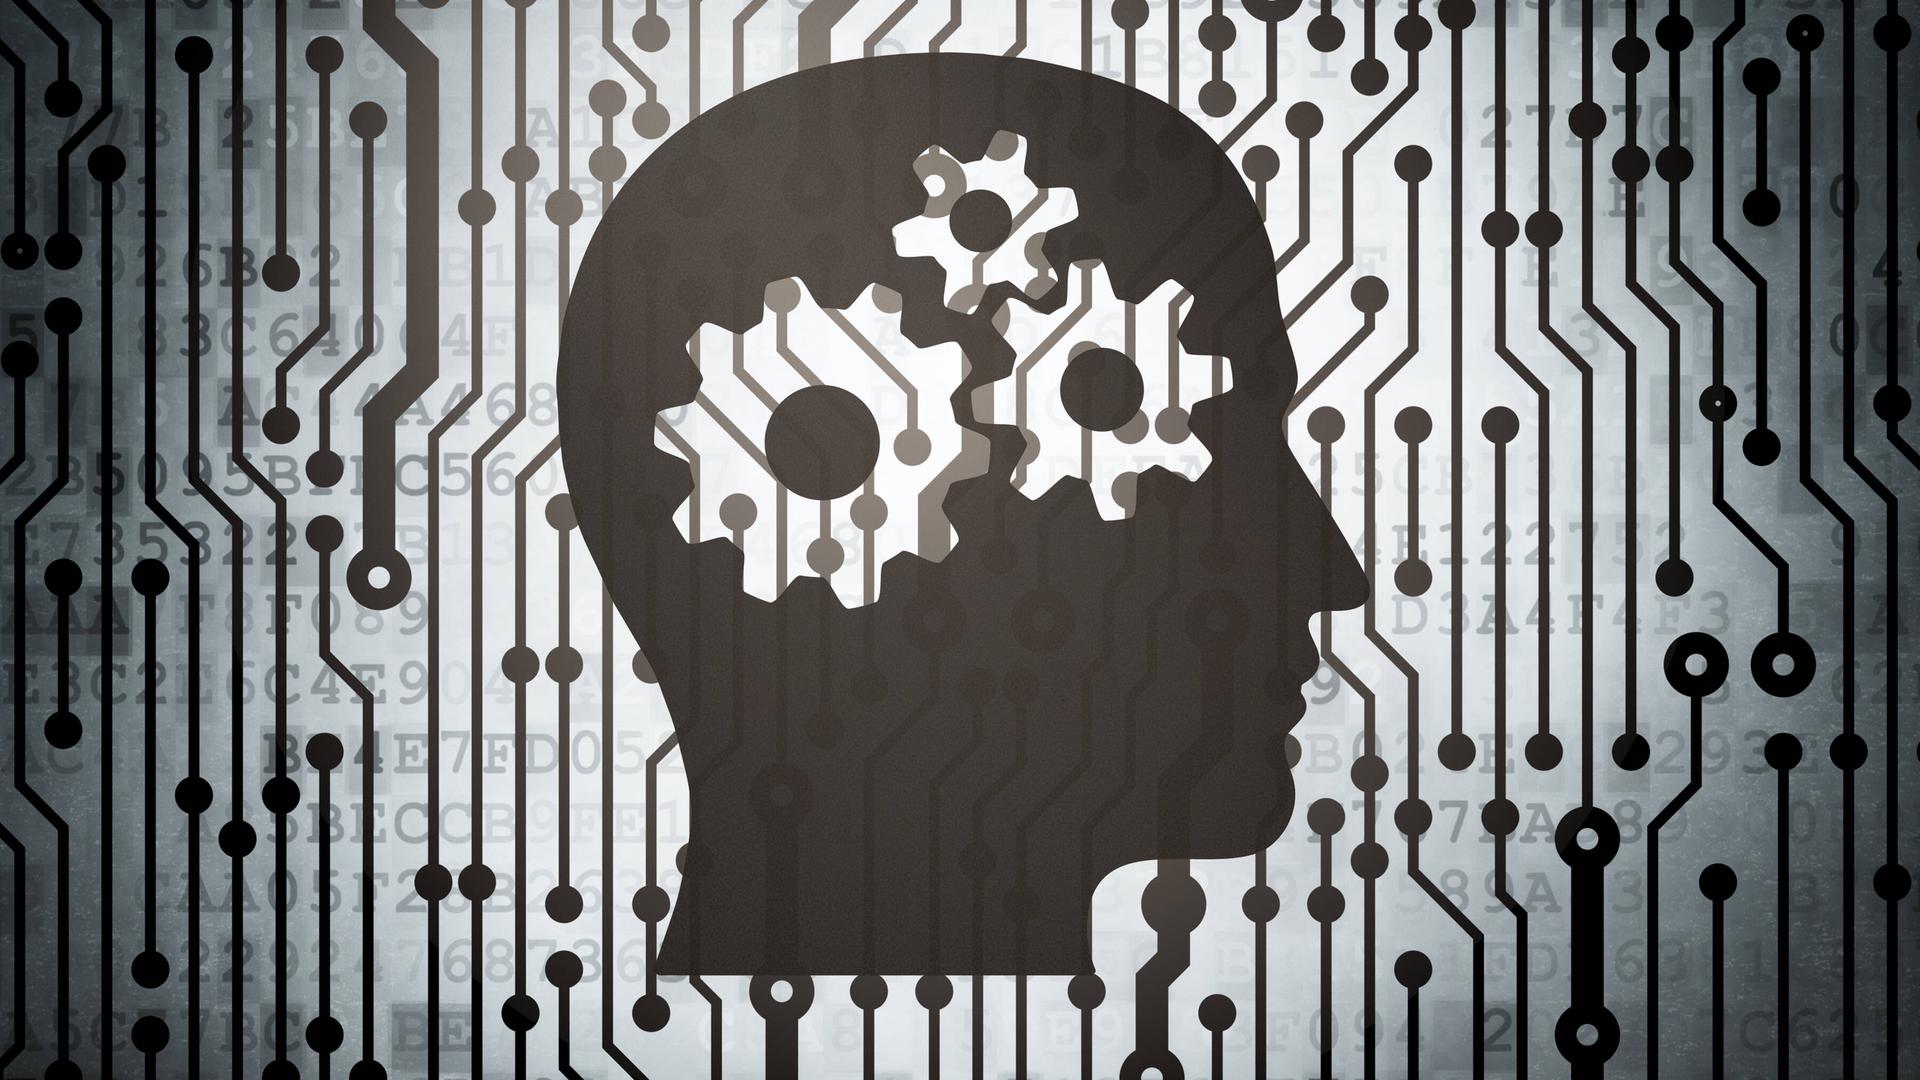 Marketing concept: circuit board with Head With Gears icon, 3d render , 10214606.jpg, business, computer, money, icon, technology, 3d, brain, concept, idea, finance, creative, target, teamwork, advertising, digital, line, social, wheel, data, market, brand, board, grayscale, gear, work, storm, head, media, promotion, white, black, symbol, strategy, electric, think, advertisement, mind, circuit, co